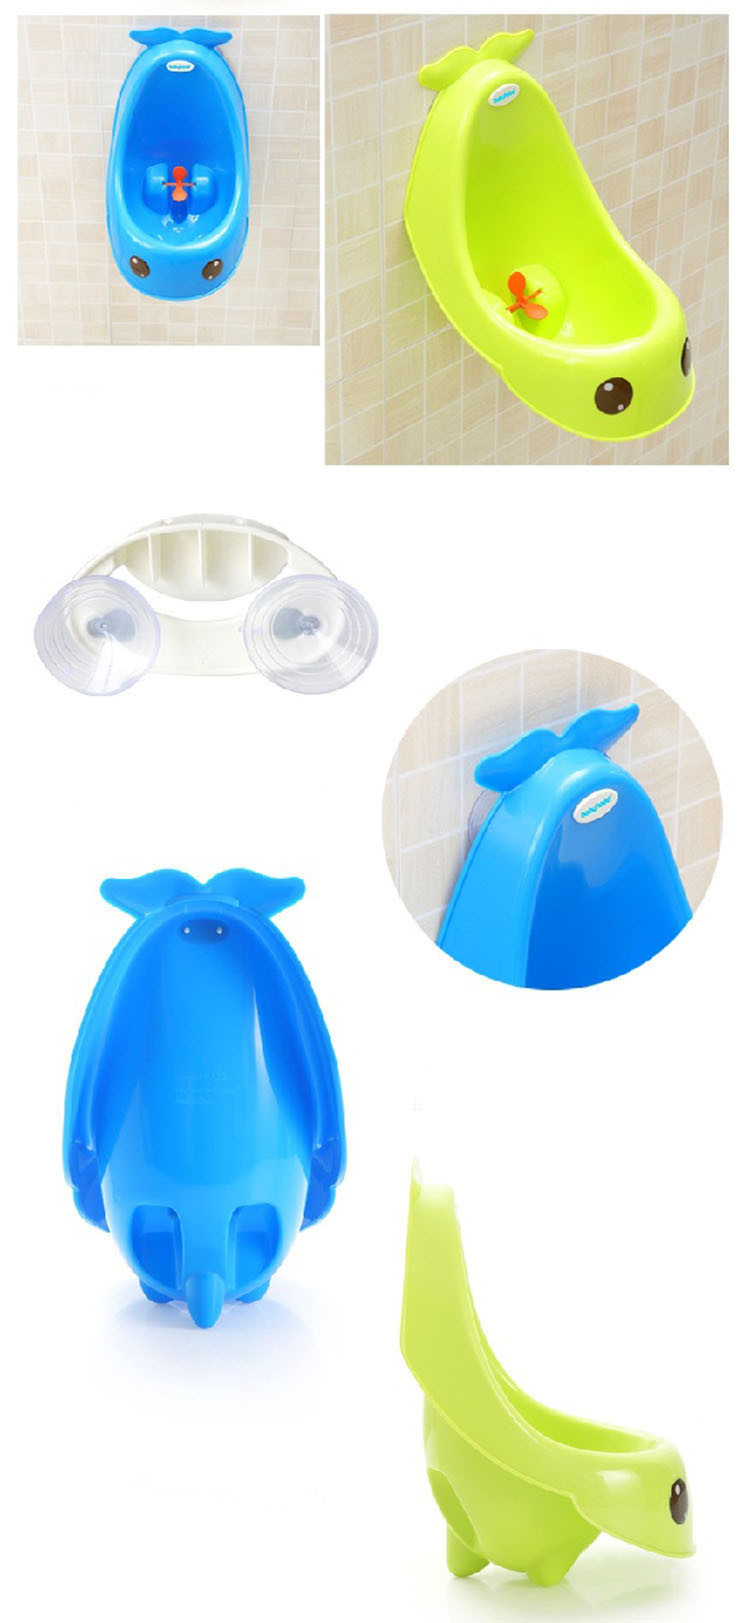 2015 Fancy Idea Design High Quality baby potty wall-hung kids toilet portable potty training toilet baby boys trainers (2)